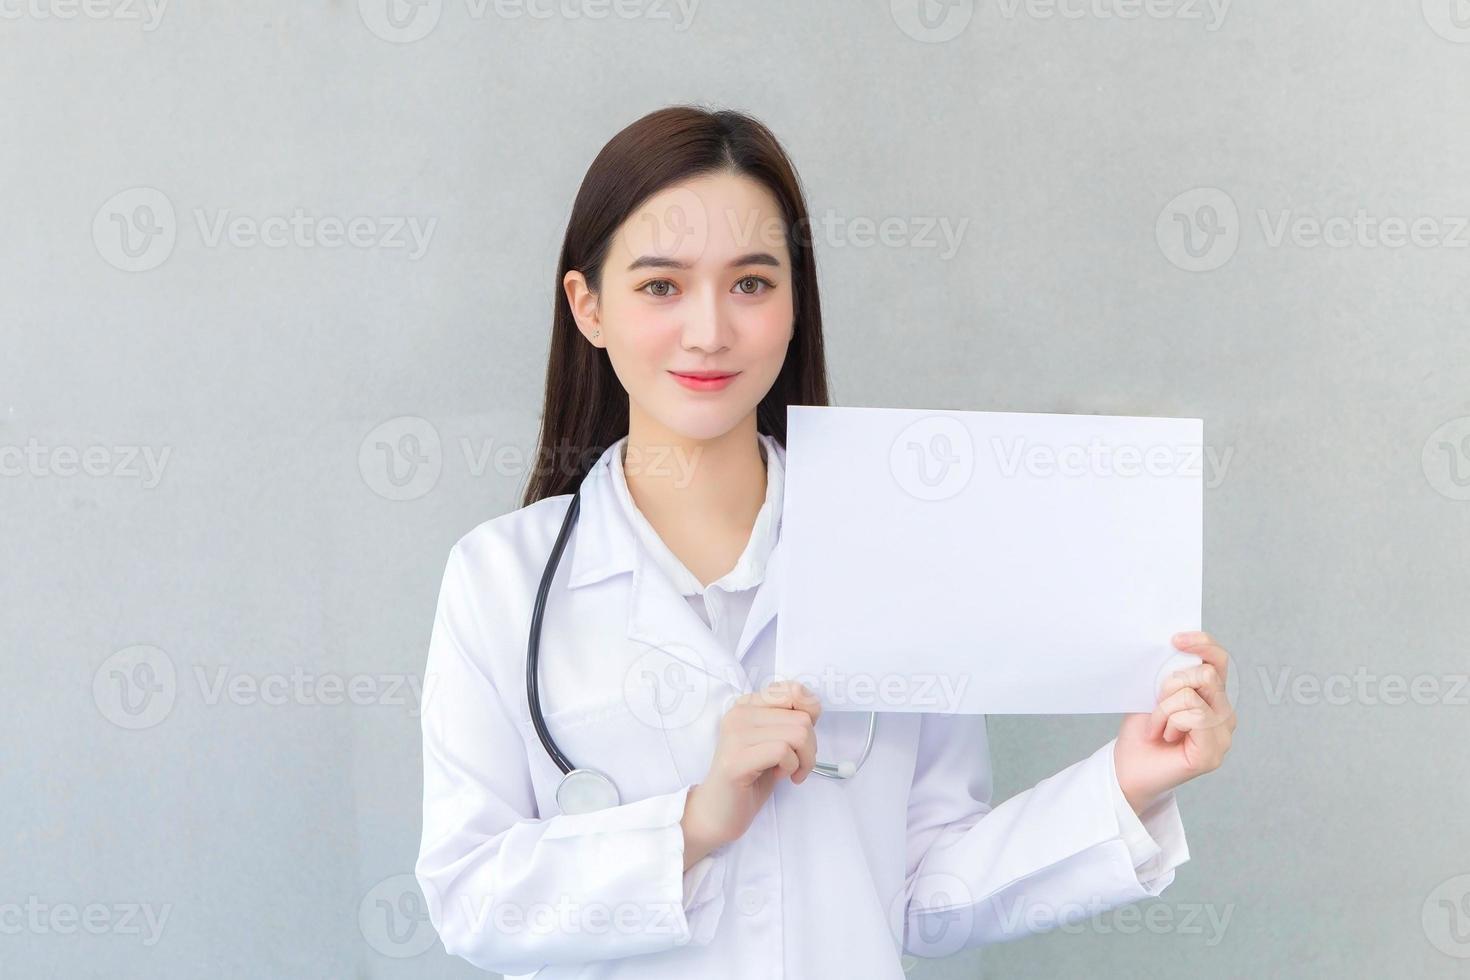 Asian woman doctor who wears medical coat holds and shows white paper to present something in healthcare concept. photo